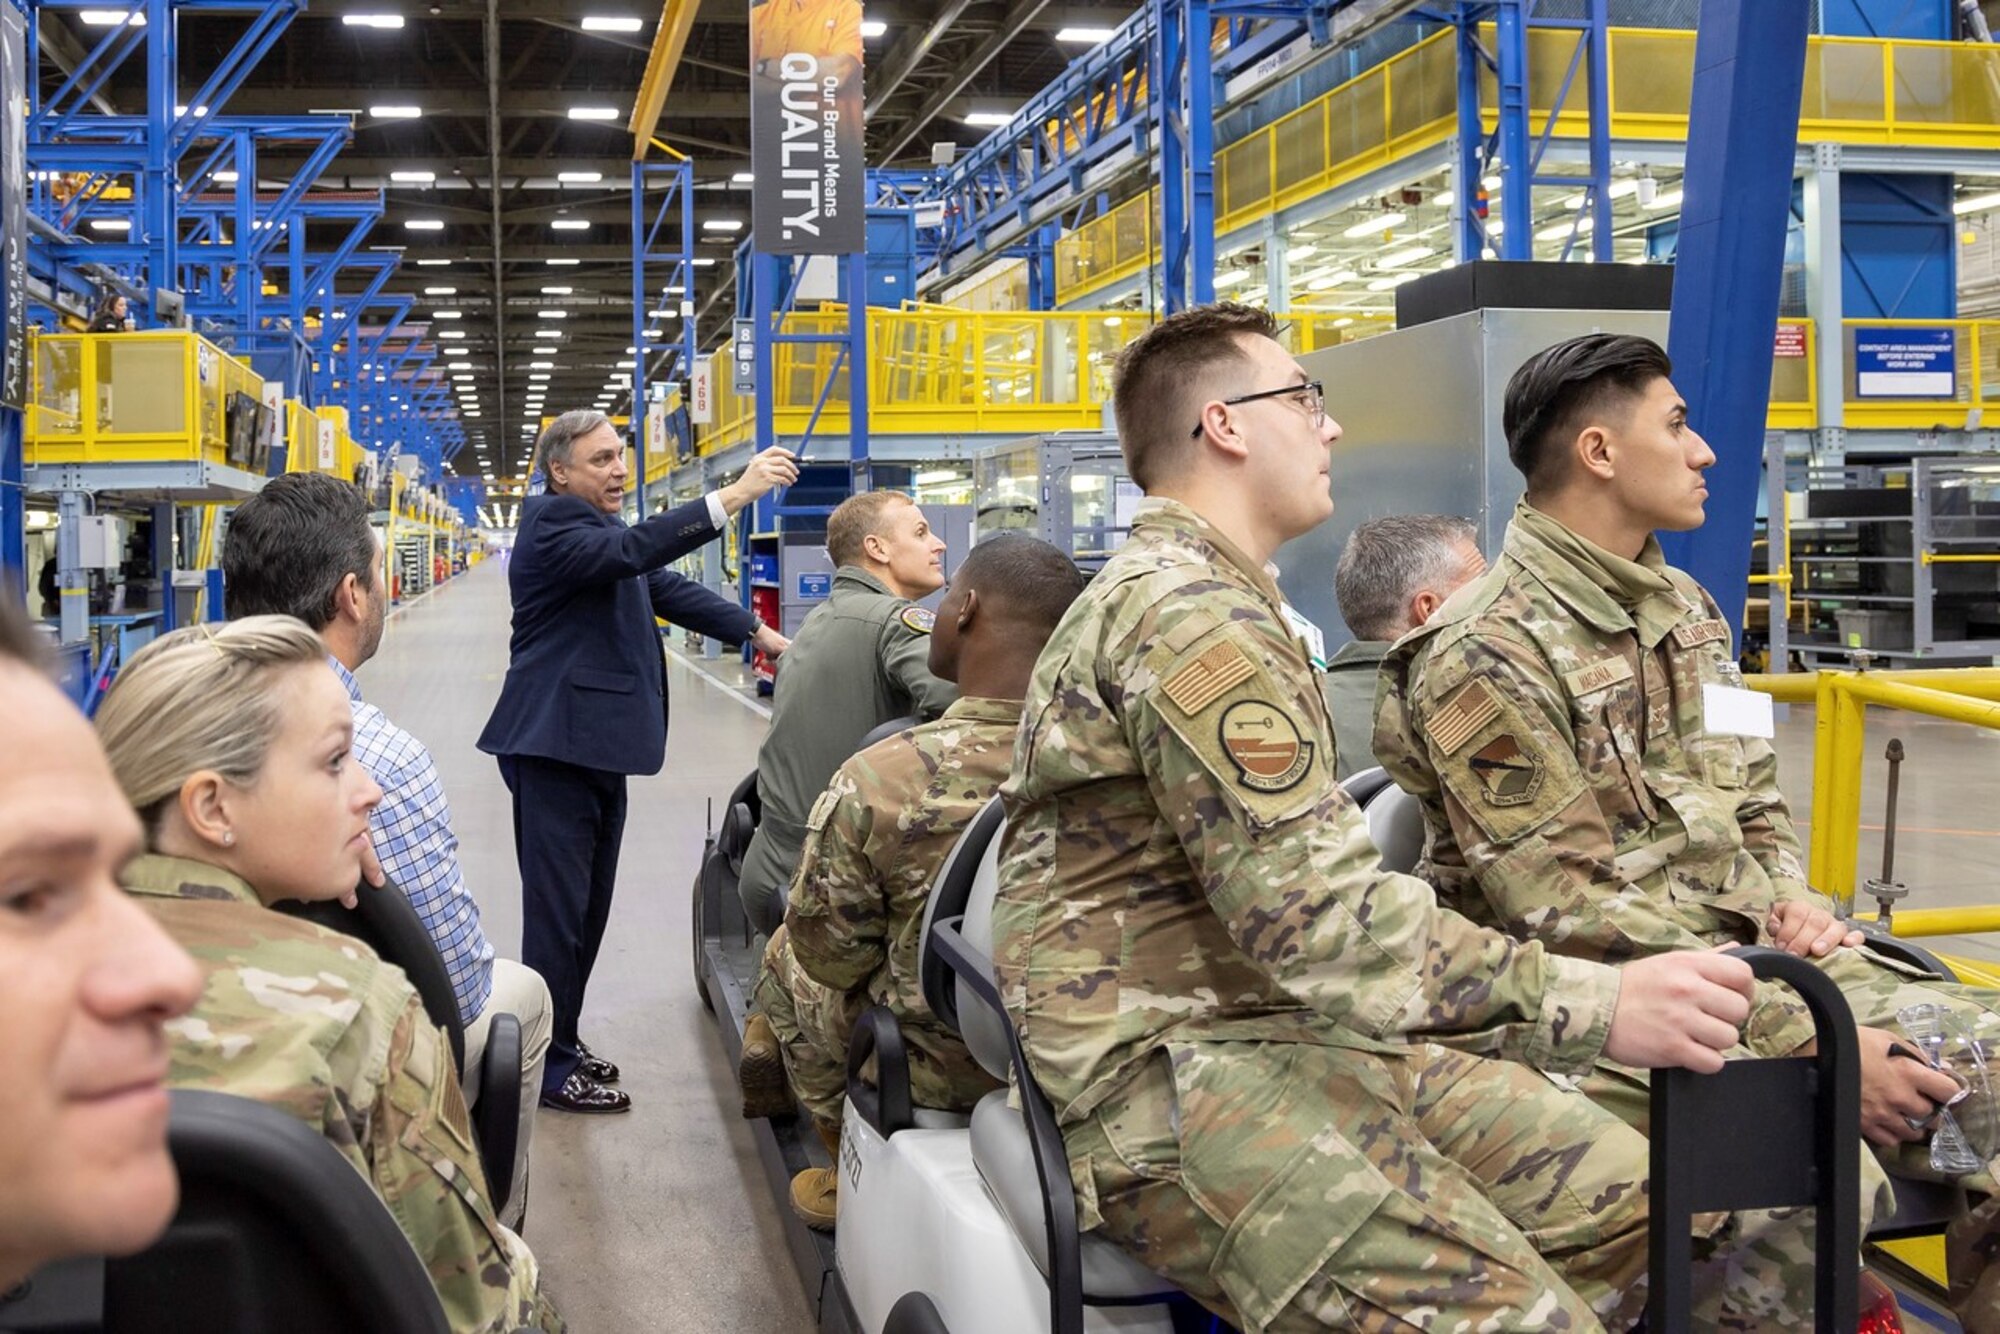 U.S. Airmen assigned to Tyndall Air Force Base, Florida, receive a tour of the Lockheed Martin factory in Fort Worth, Texas, Oct. 20, 2022